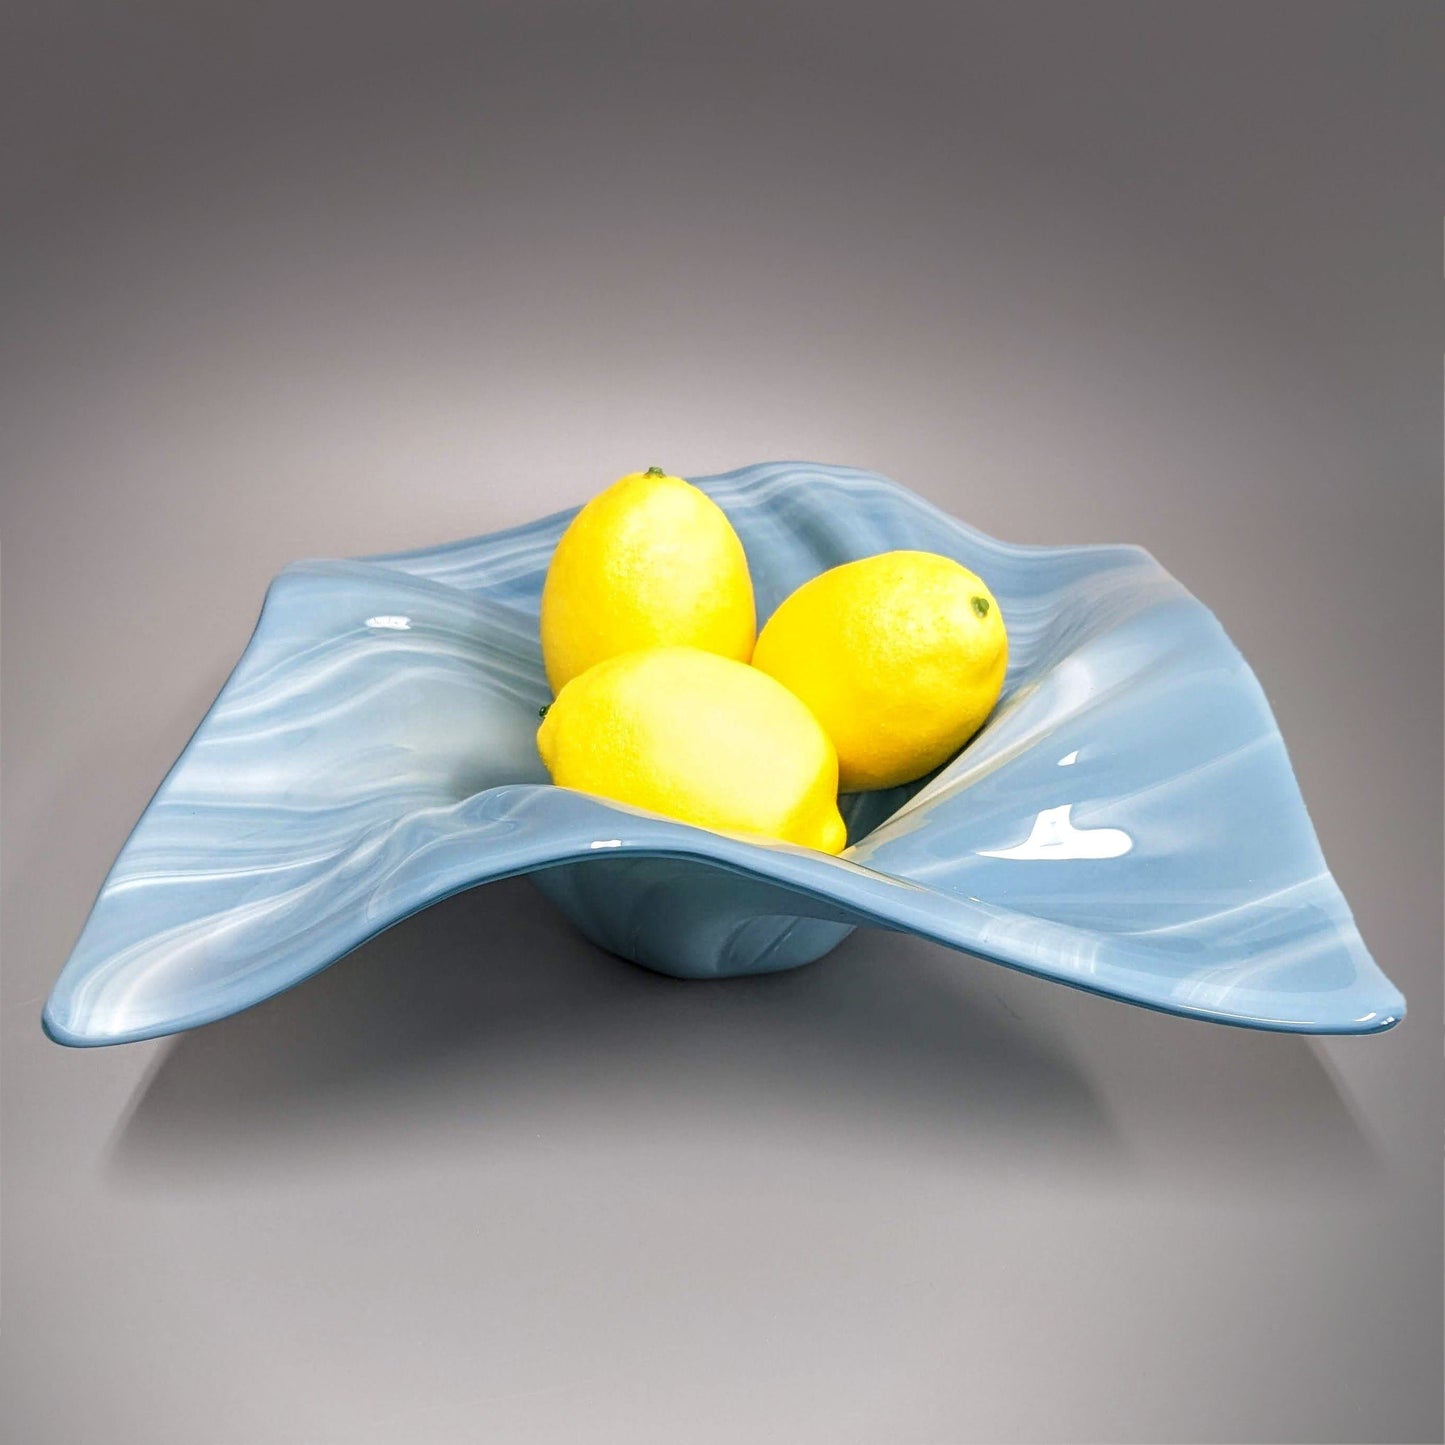 Glass Art Wave Bowl in Gray Blue and White